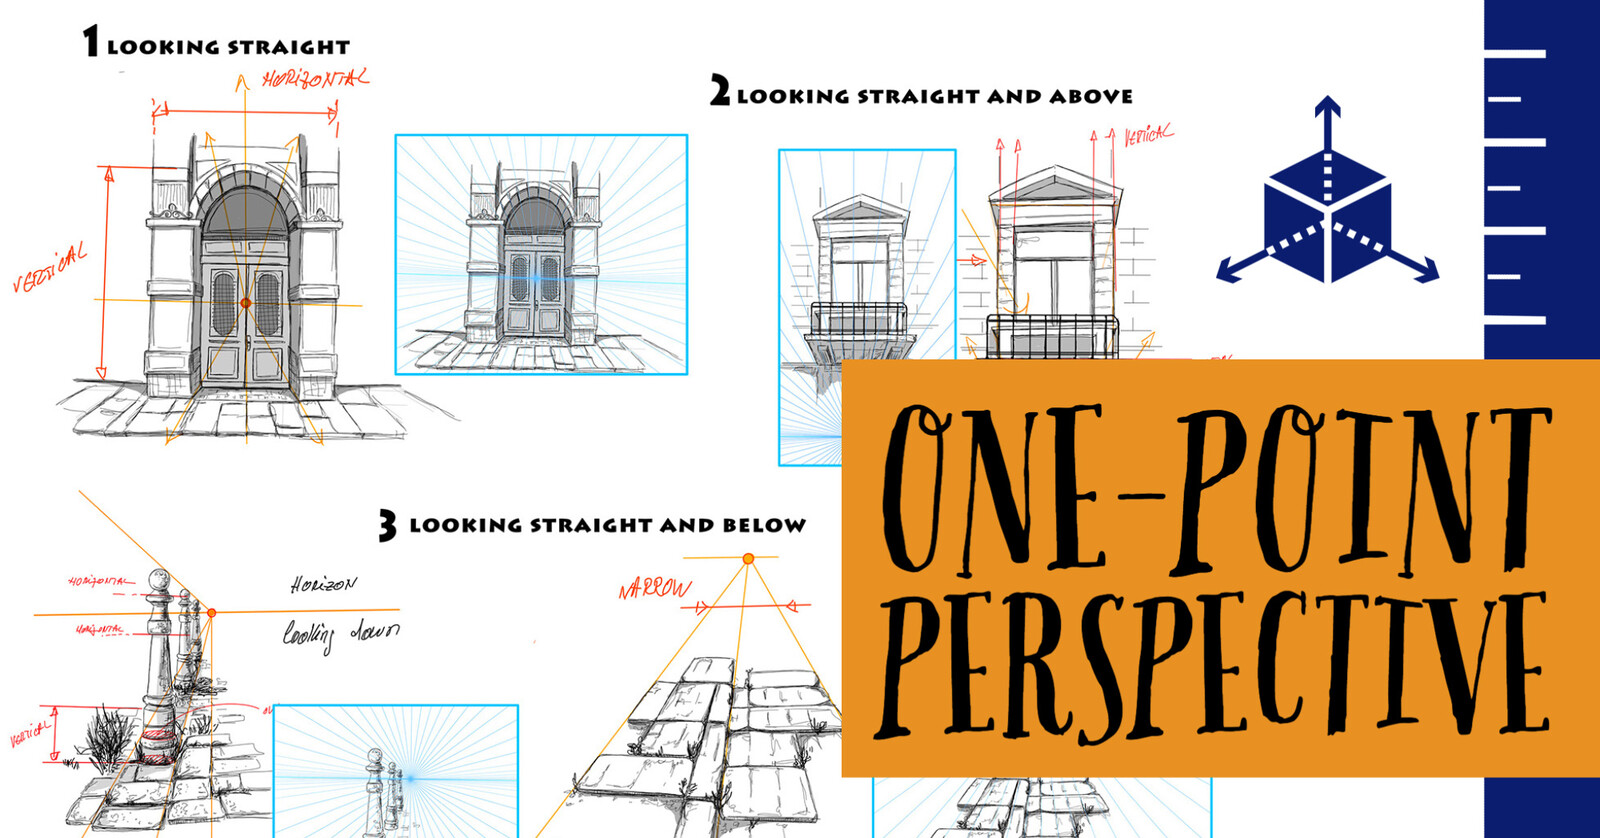 Article - Perspective Drawing Part 2. One-Point Perspective https://www.cristinateachingart.com/practical-guide-in-perspective-drawing-part-2-one-point-perspective-drawing/